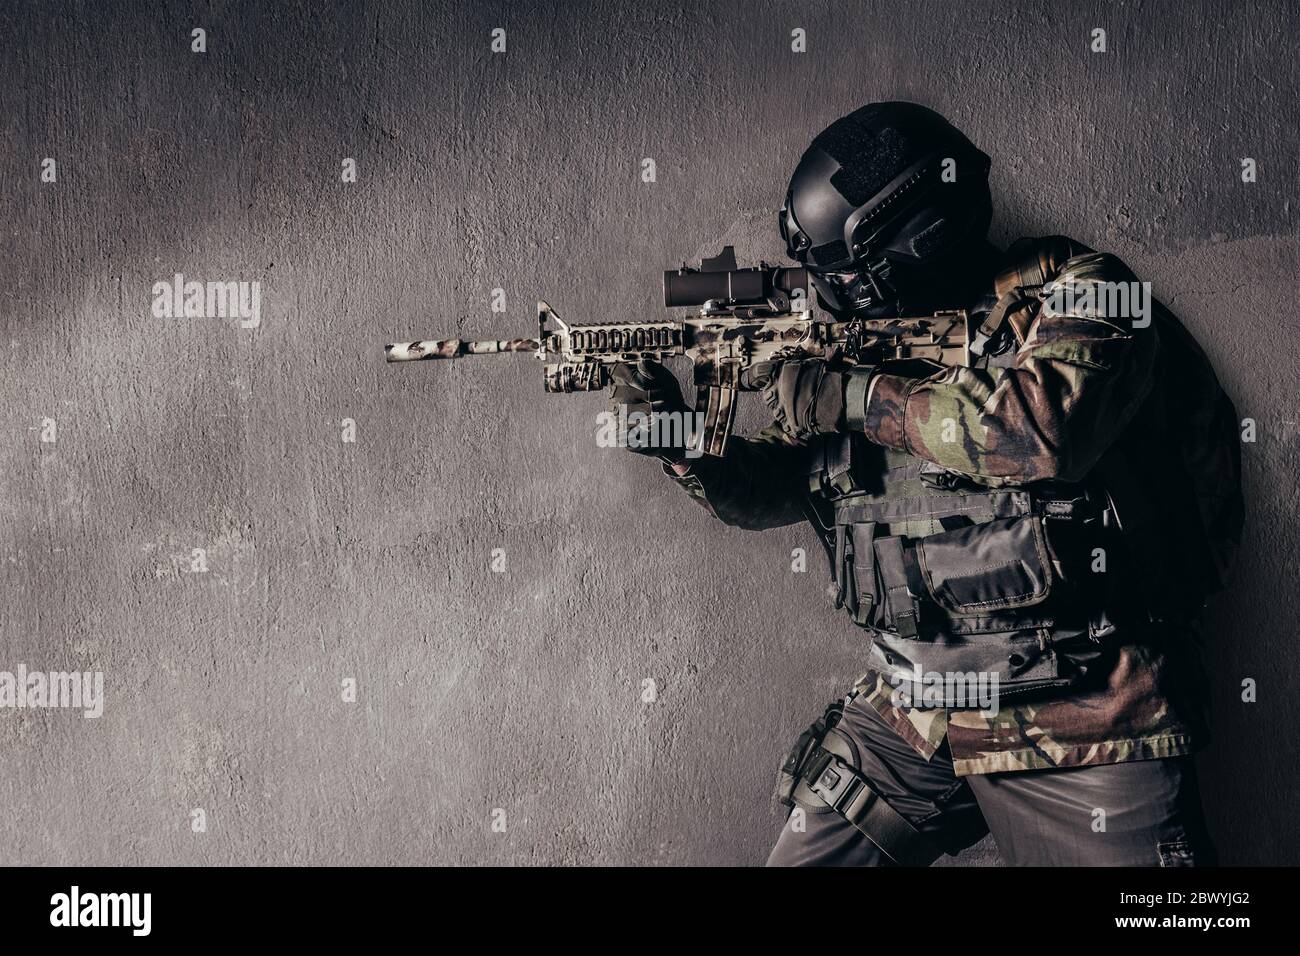 Photo of a fully equipped soldier in camouflage uniform standing and aiming rifle on grungy concrete wall background. Stock Photo